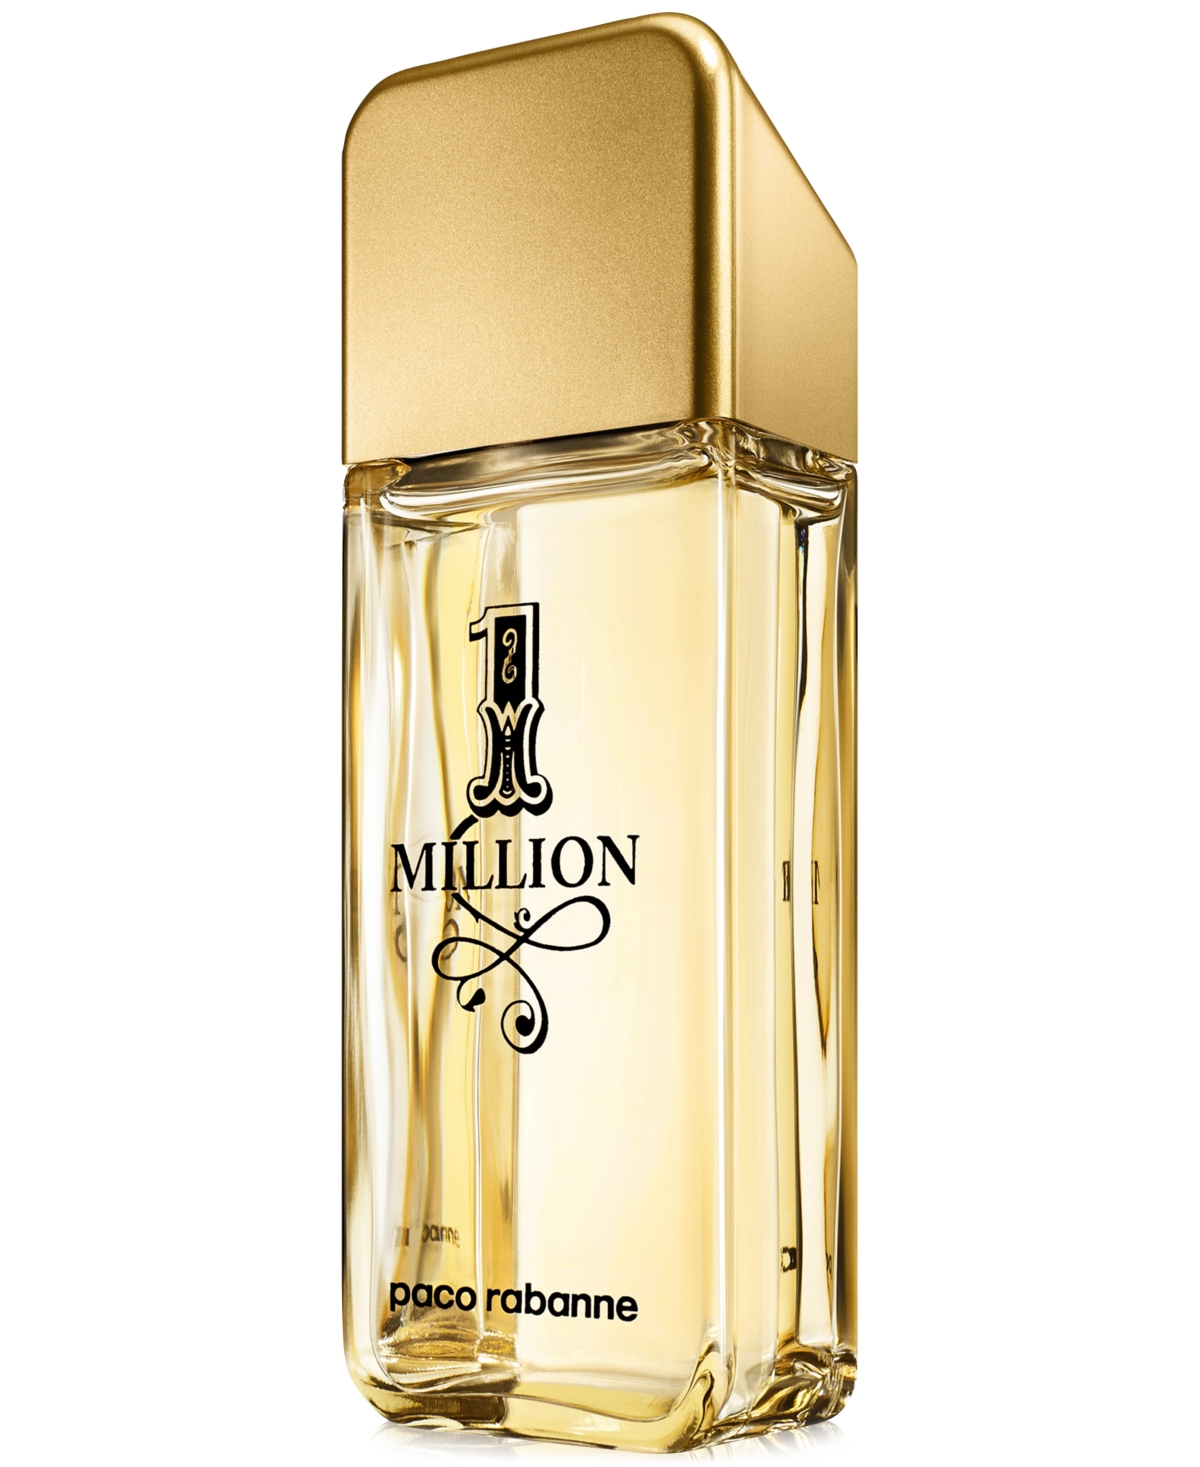 EAN 3349666007983 product image for Paco Rabanne 1 Million Aftershave Lotion, 3.4-oz | upcitemdb.com